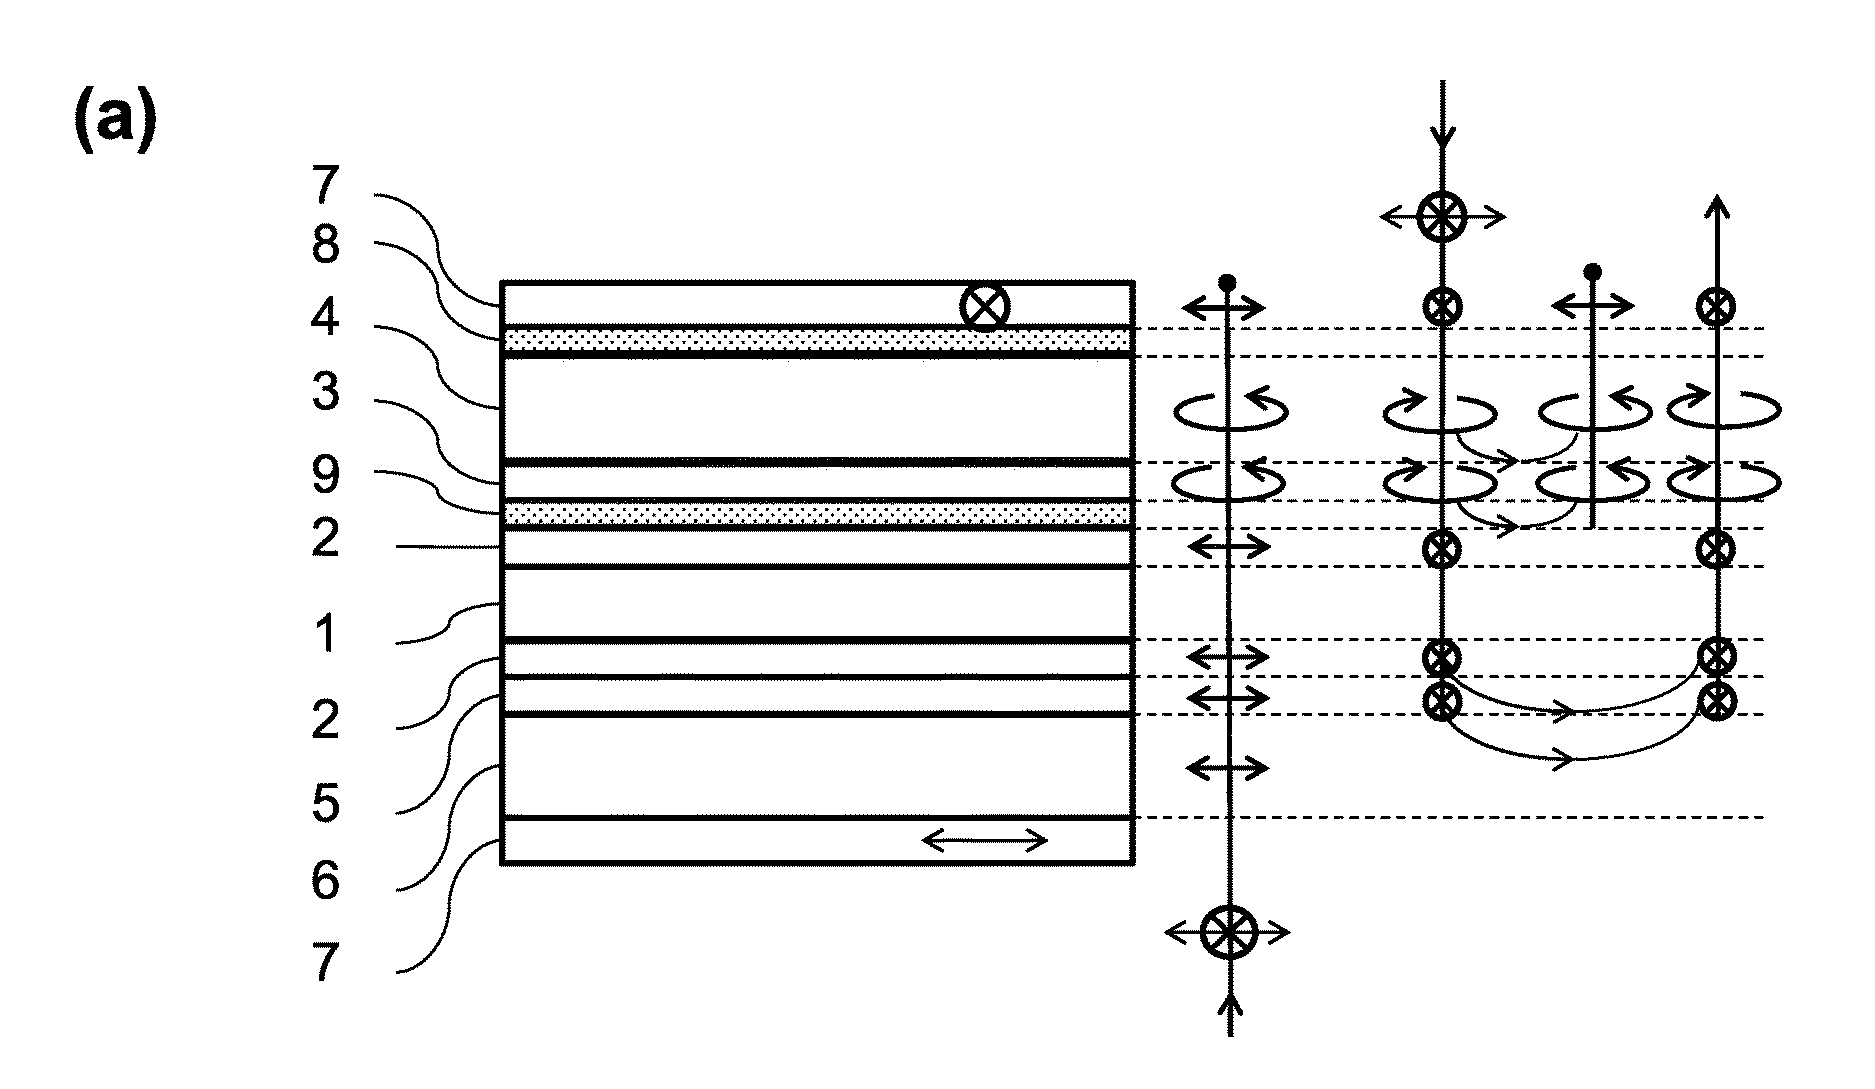 Sunlight readable LCD with uniform in-cell retarder